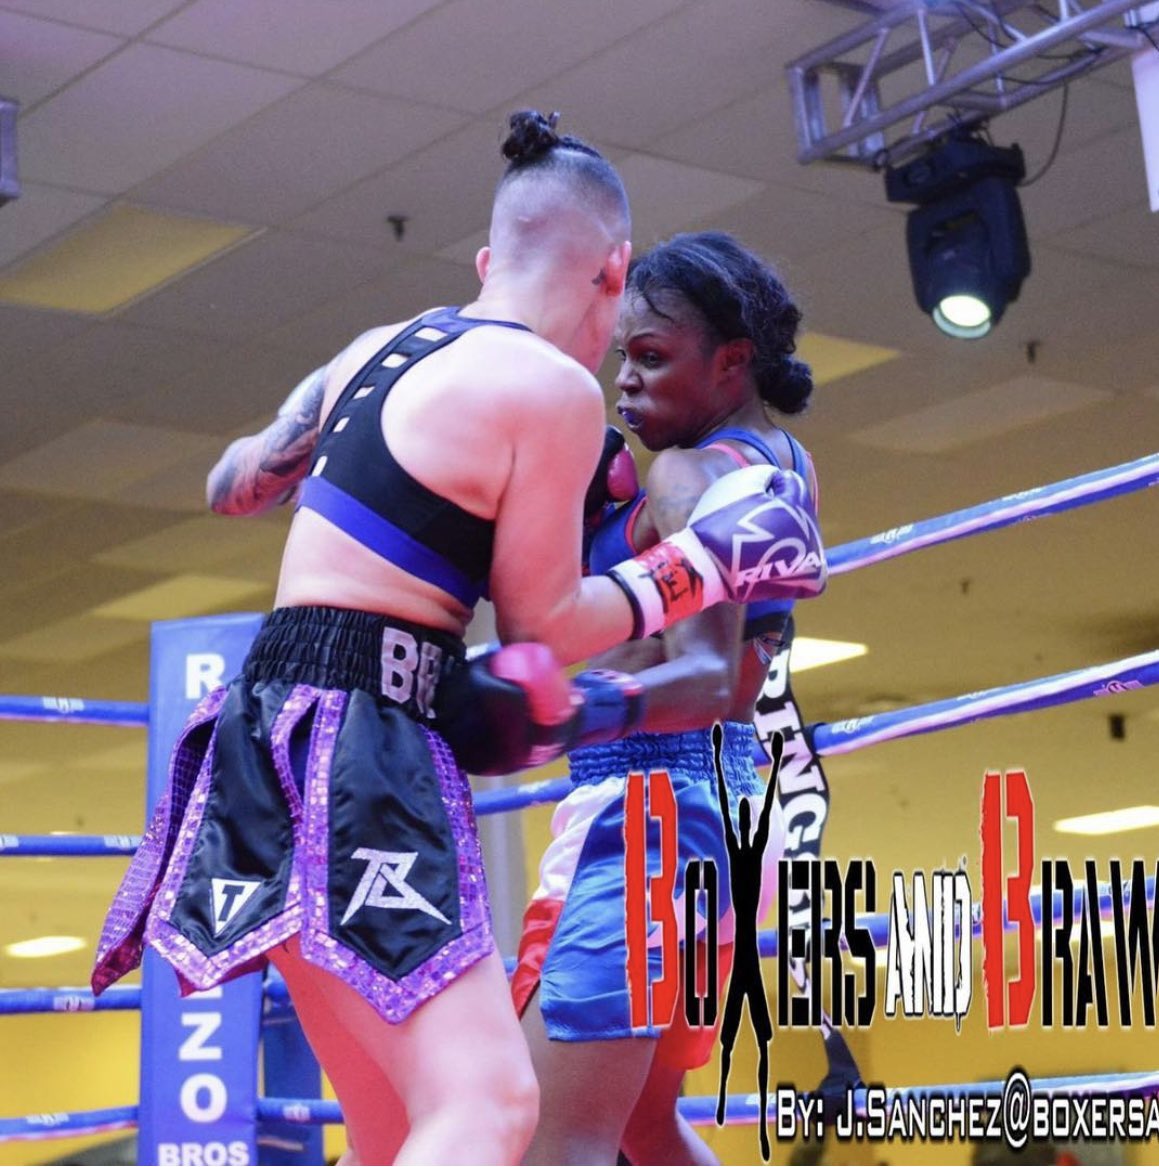 Body work is vicious!! Those super bantamweight champions better look out!!! #womensboxing #fighter #champion #DallasBoxing #superbantamweight